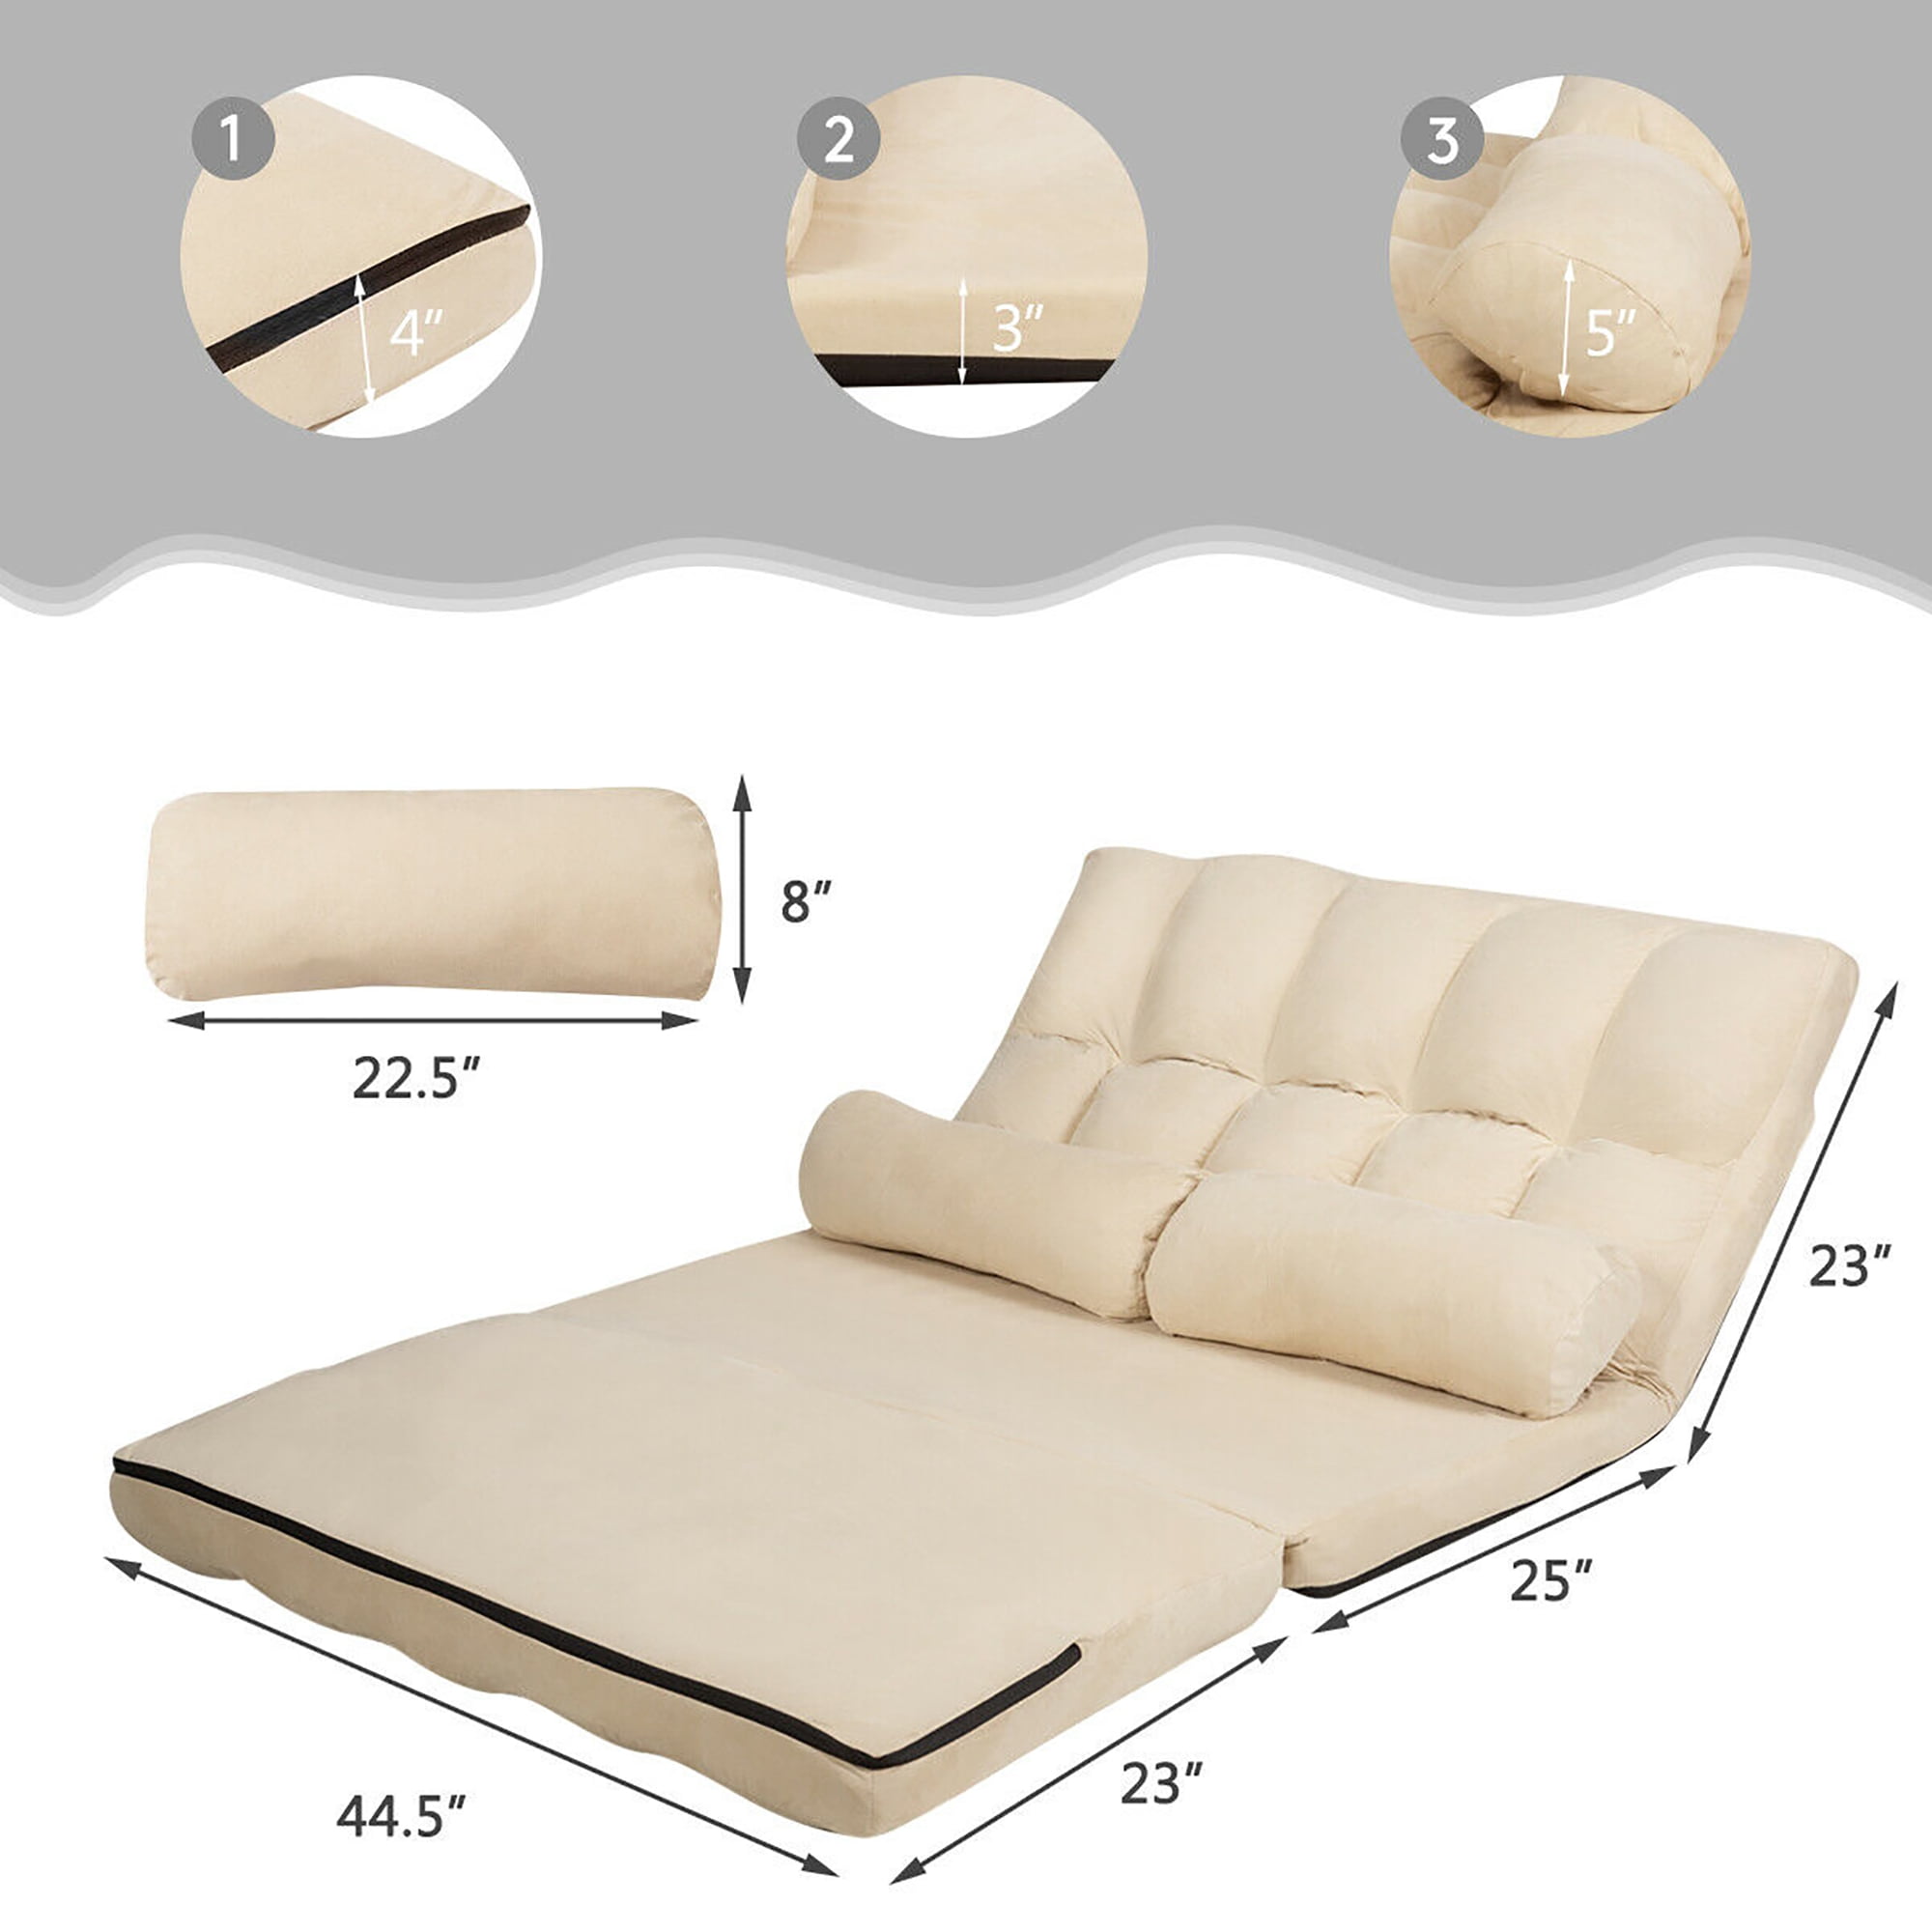 5 Positions Adjustable Floor Sofa and Couch with 2 Pillows for Living Room/Bedroom/Balcony Beige Folding Floor Couch Bed Floor Sofa Bed for Adults 